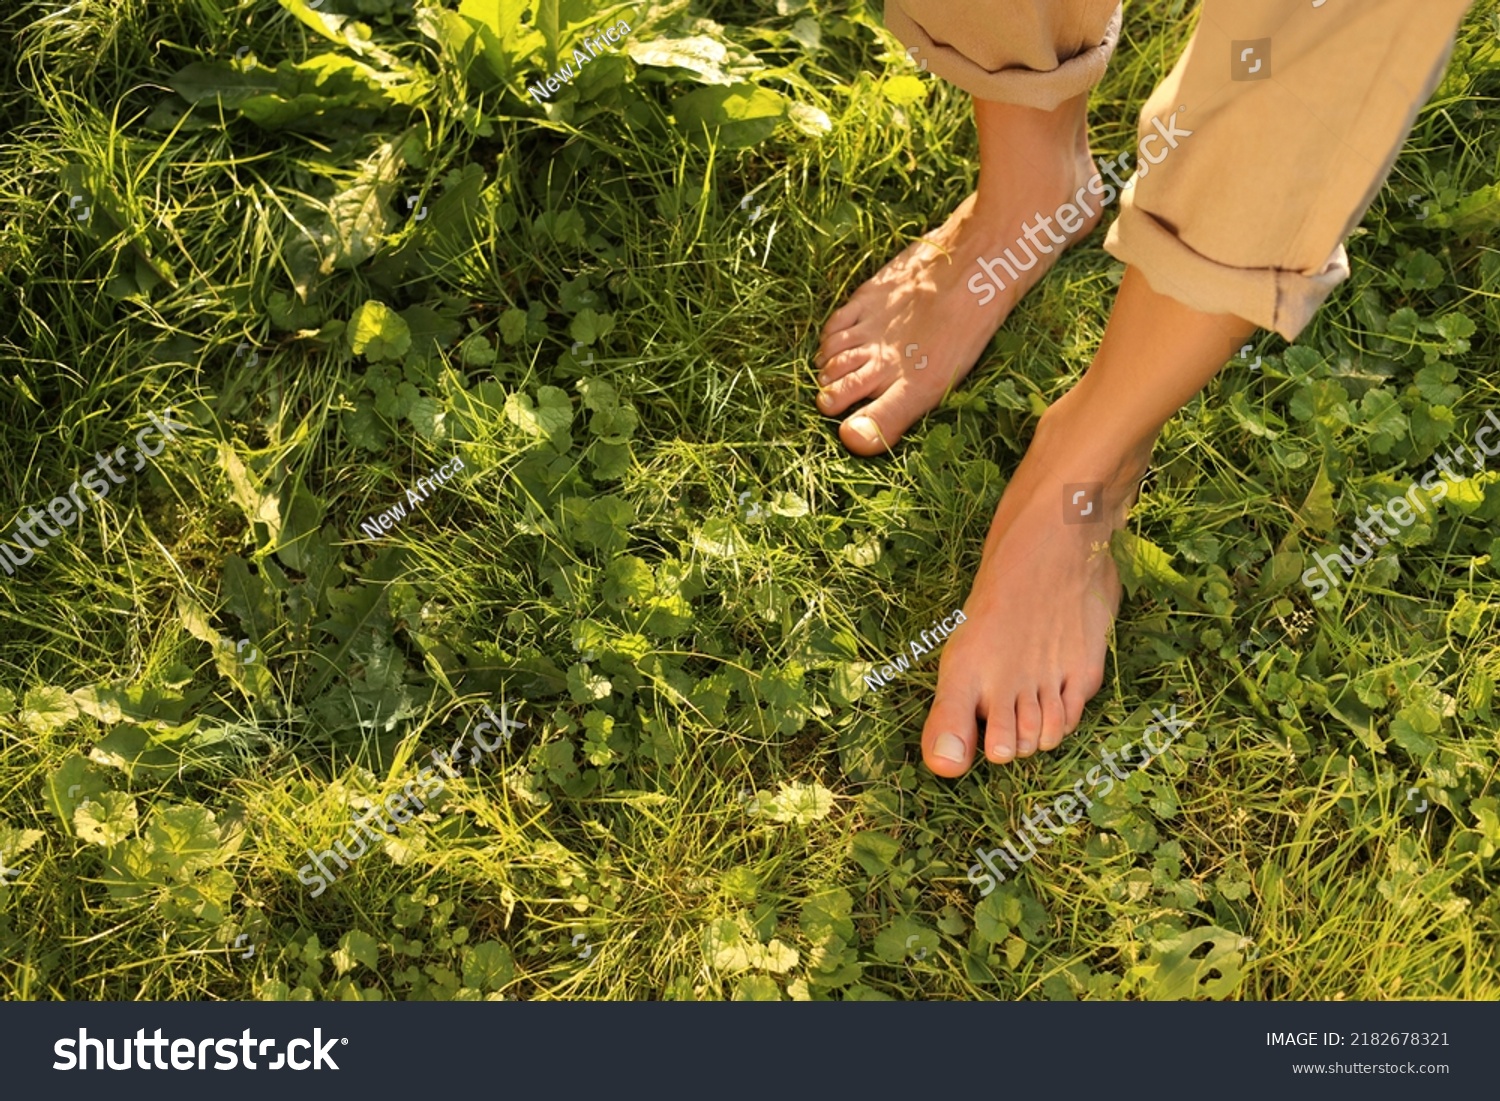 Woman walking barefoot on green grass outdoors, above view. Space for text #2182678321